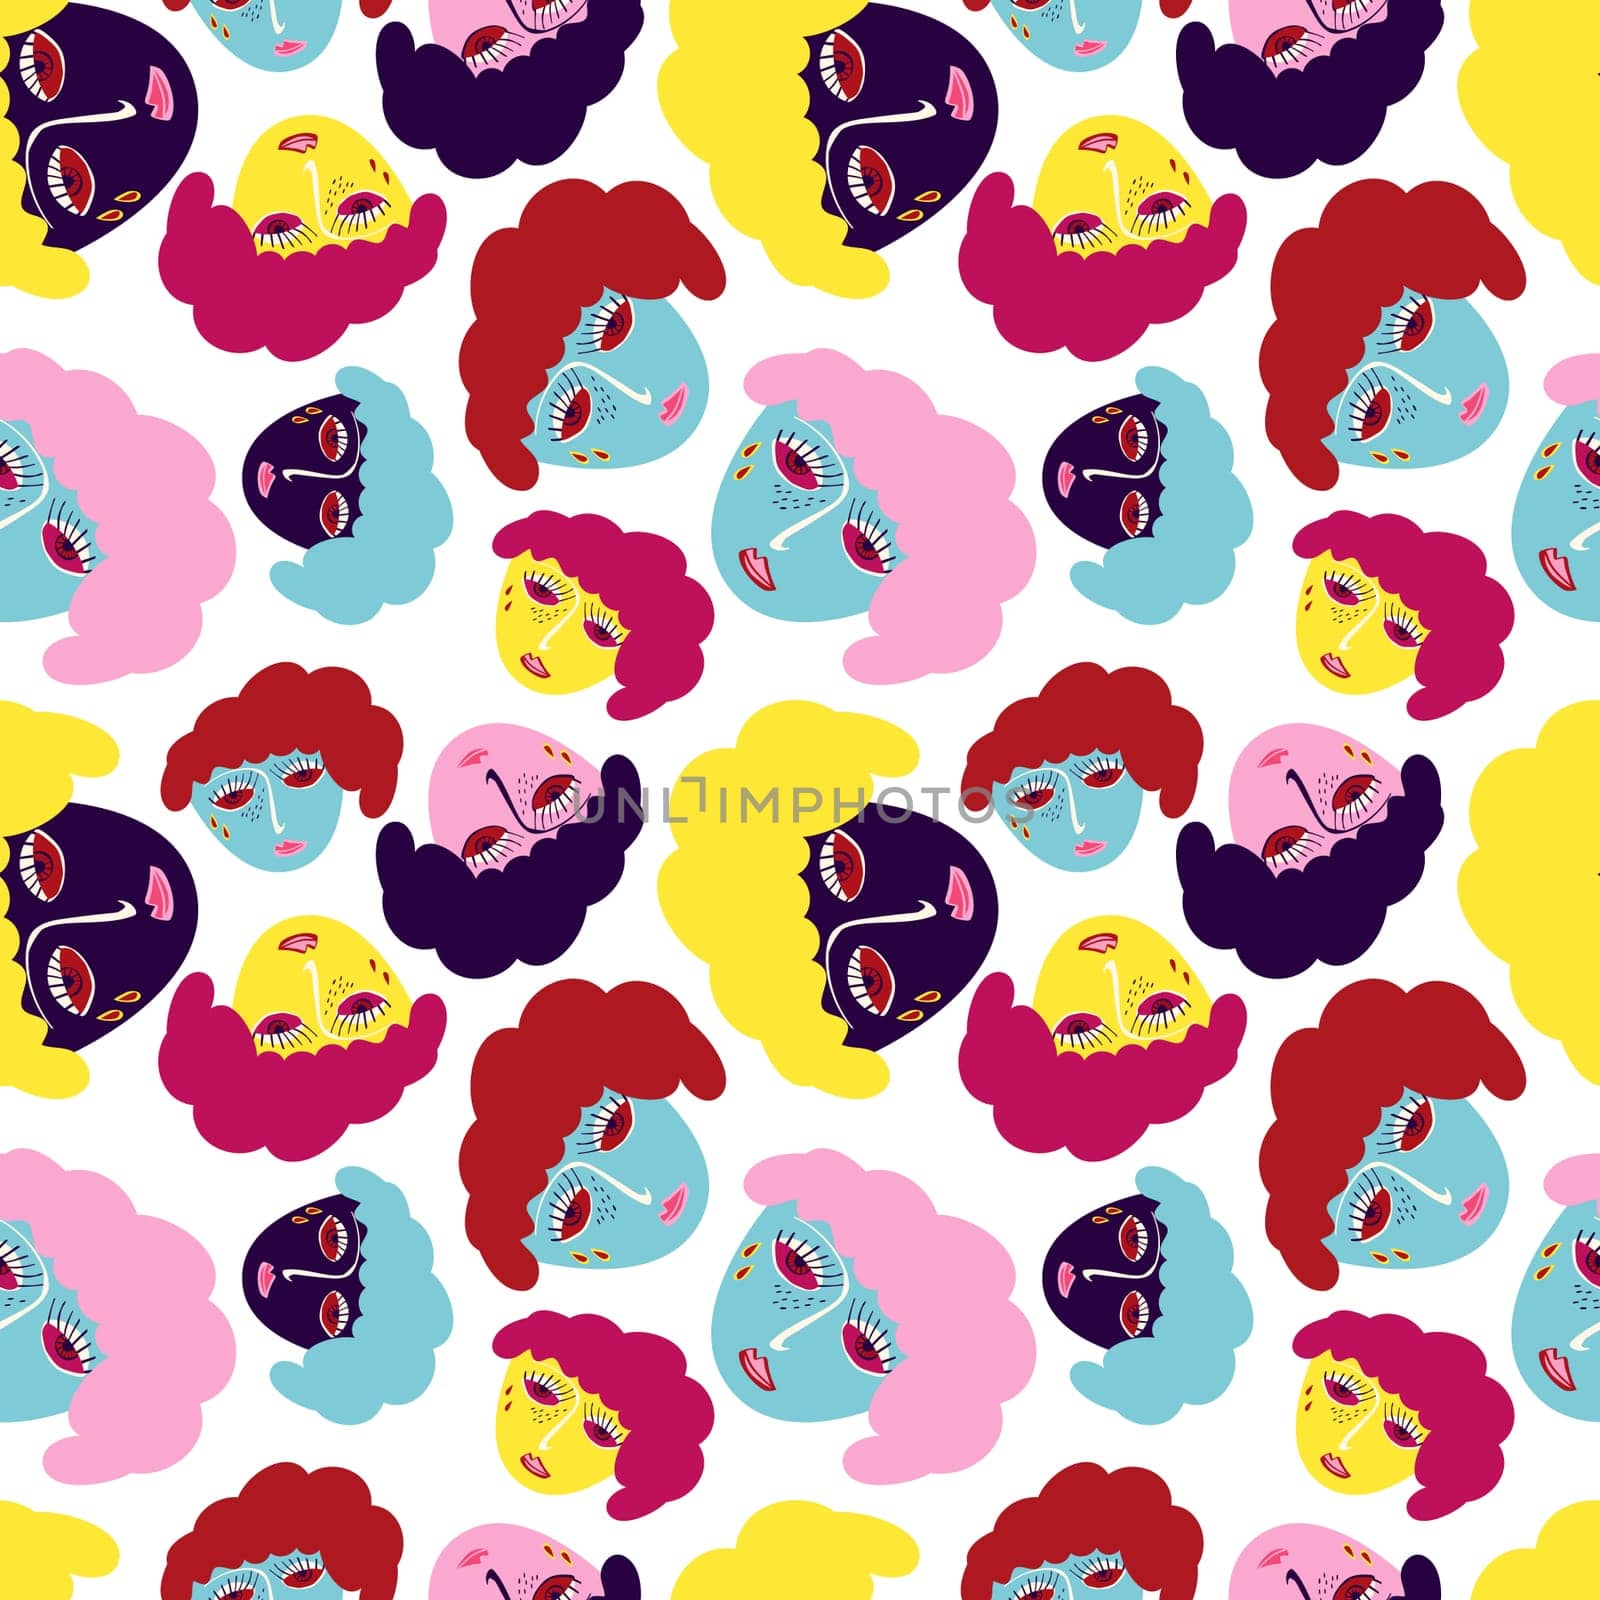 A colorful pattern of cartoon faces with lips and eyes by Dustick